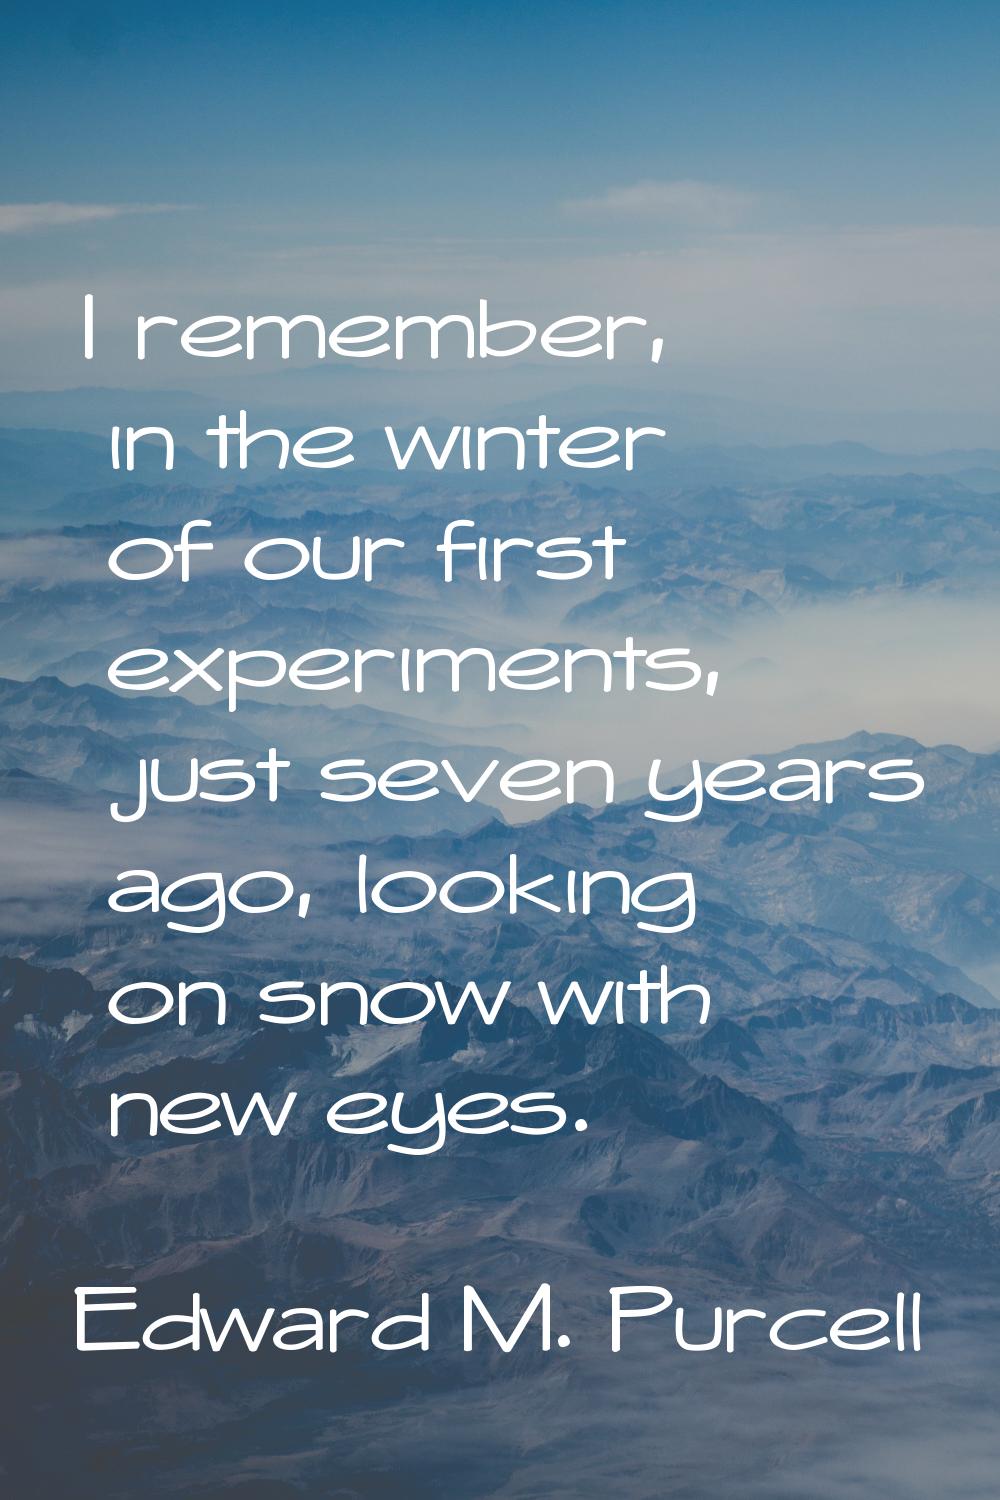 I remember, in the winter of our first experiments, just seven years ago, looking on snow with new 